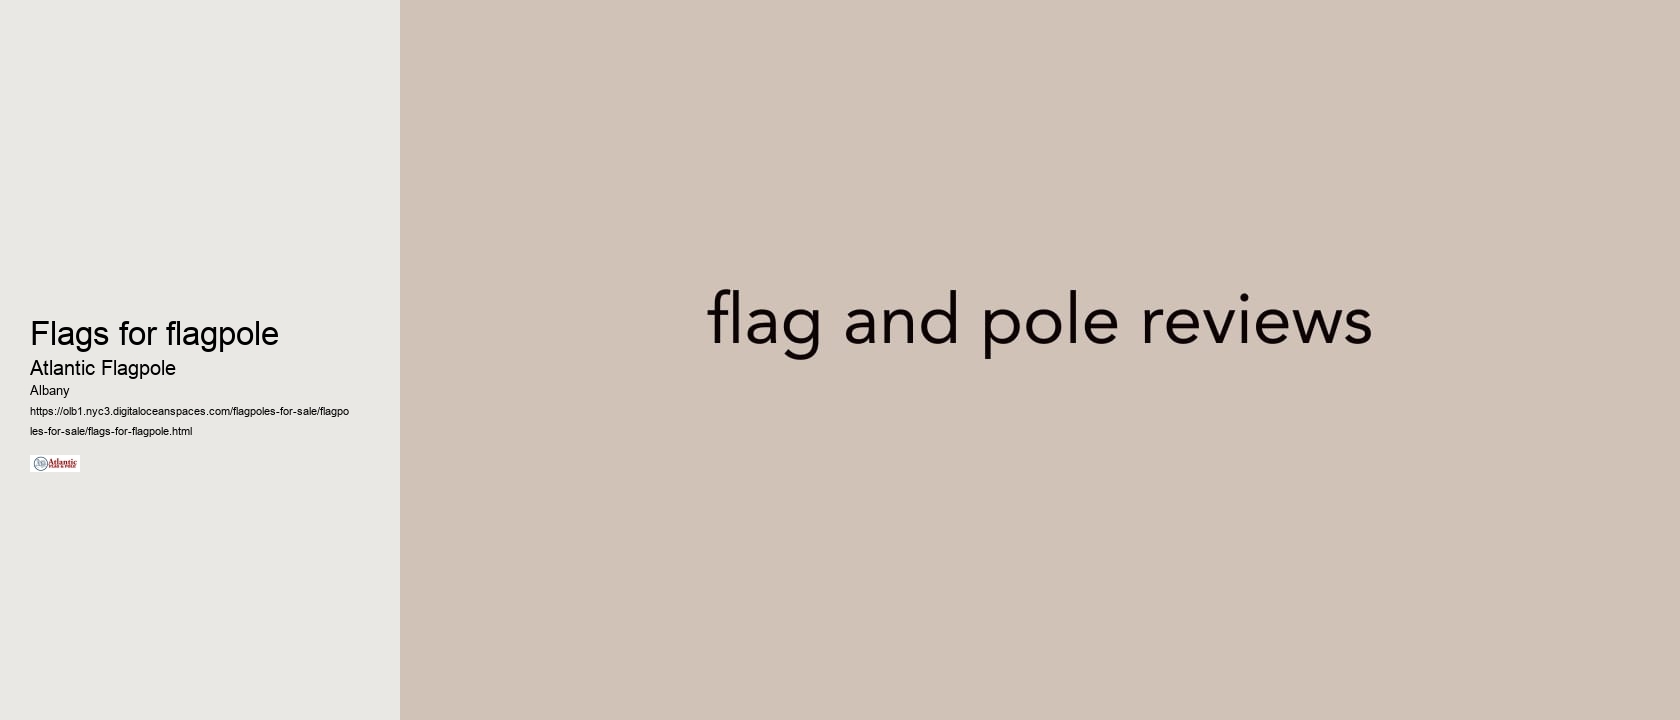 flags for flagpole